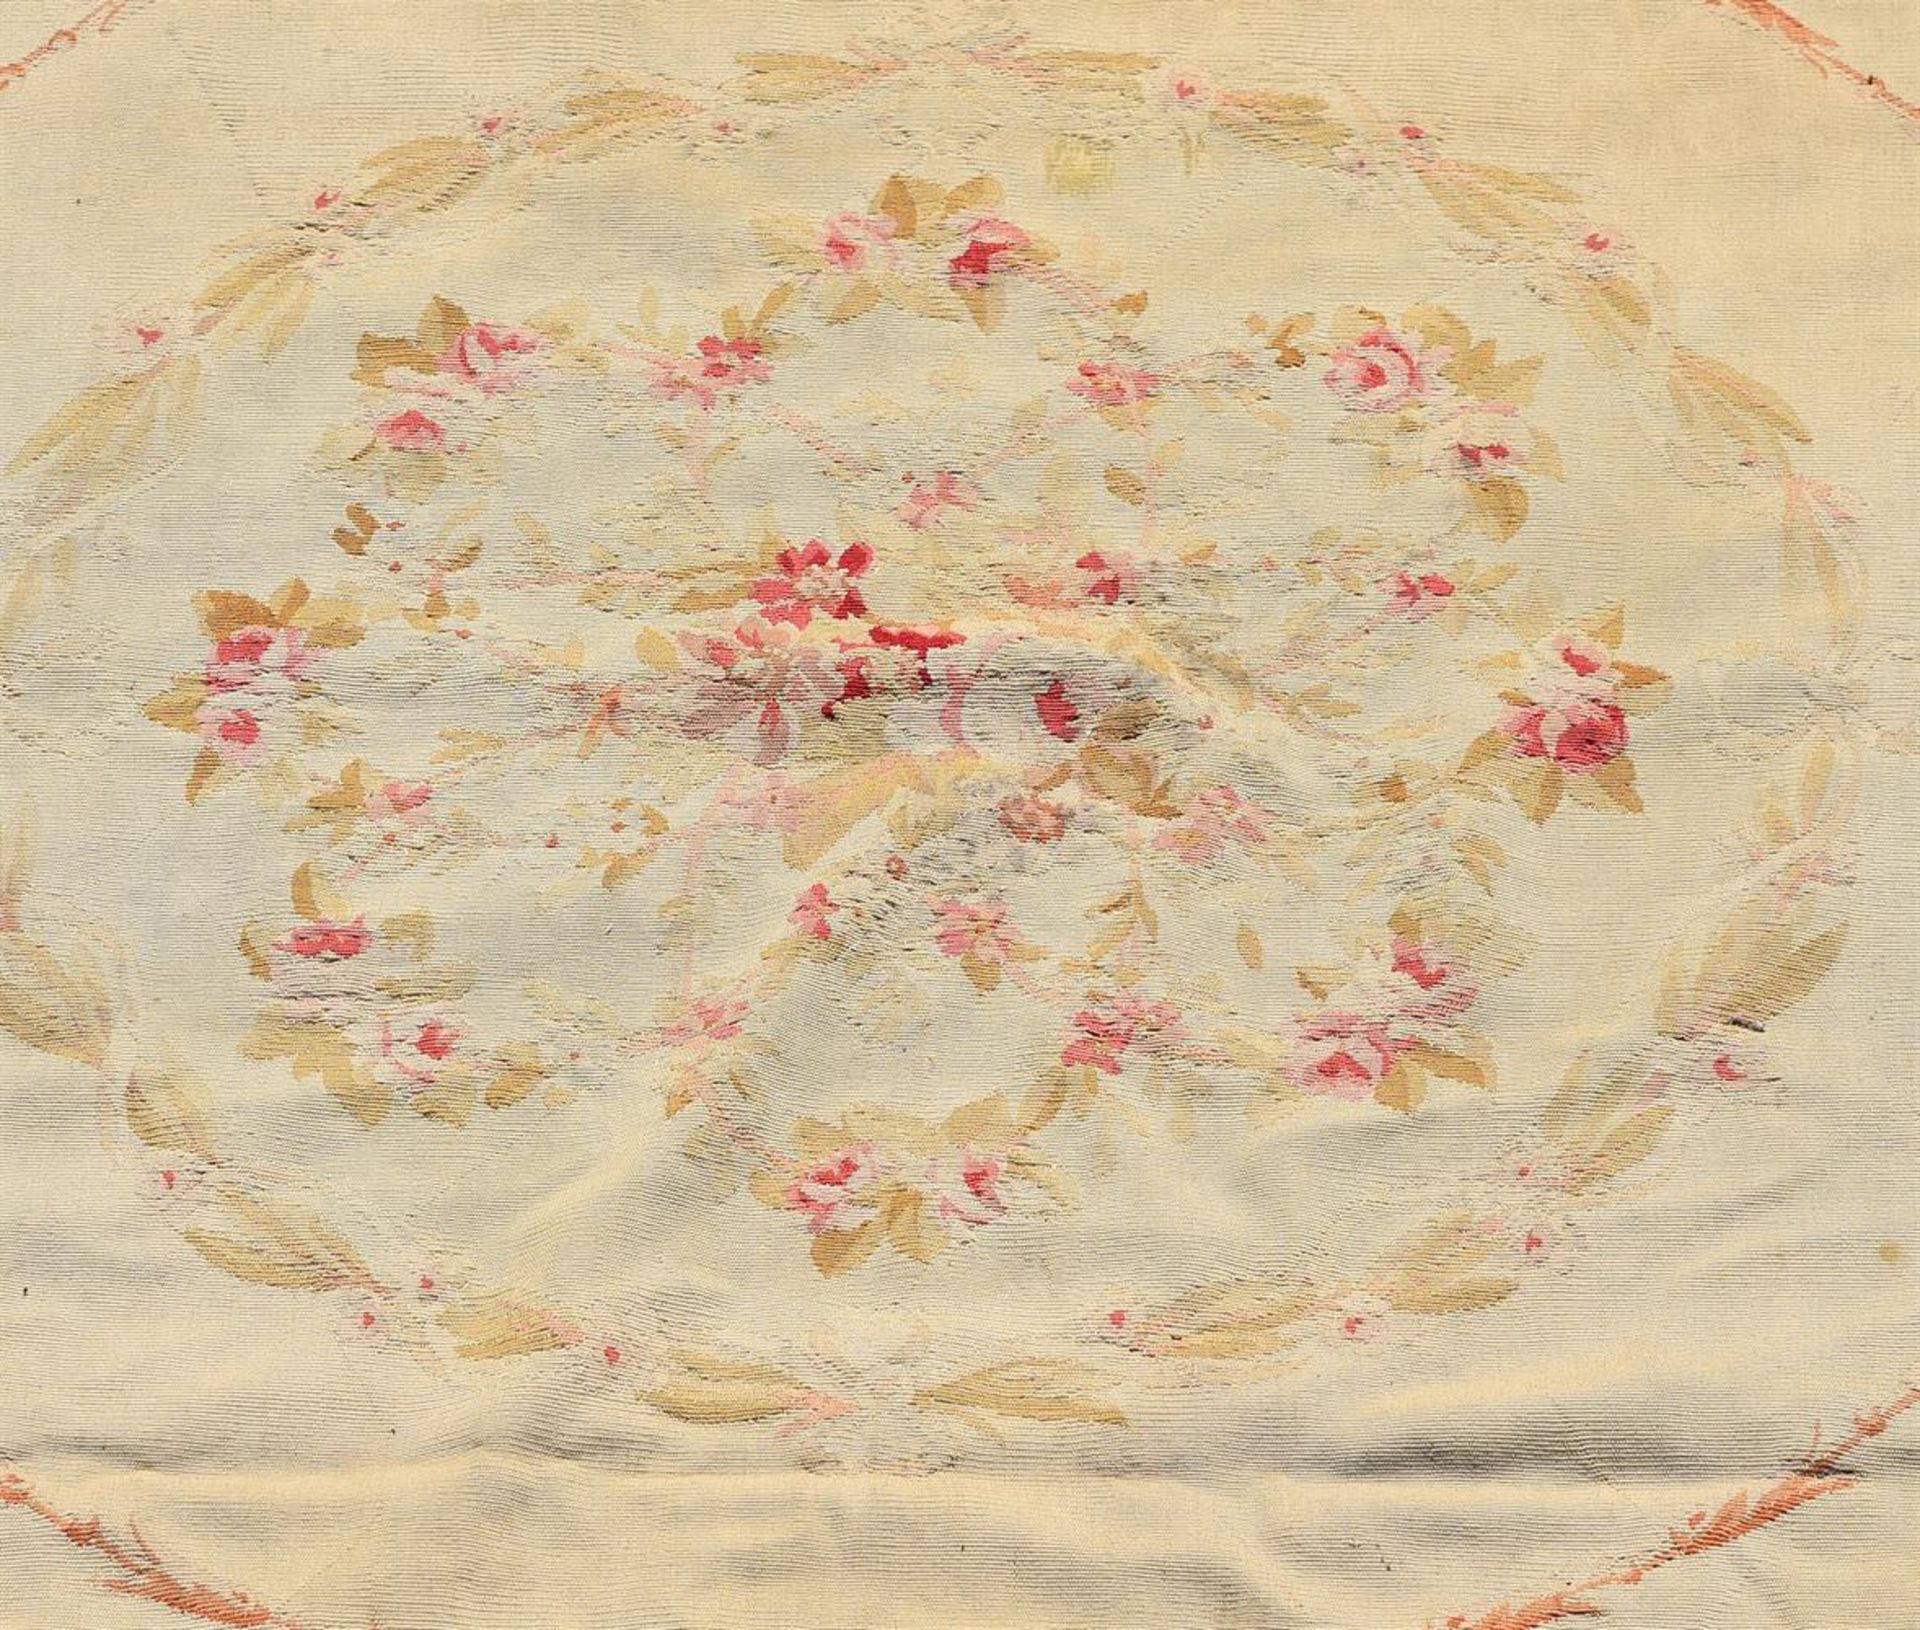 A FRENCH AUBUSSON RUG - Image 2 of 3